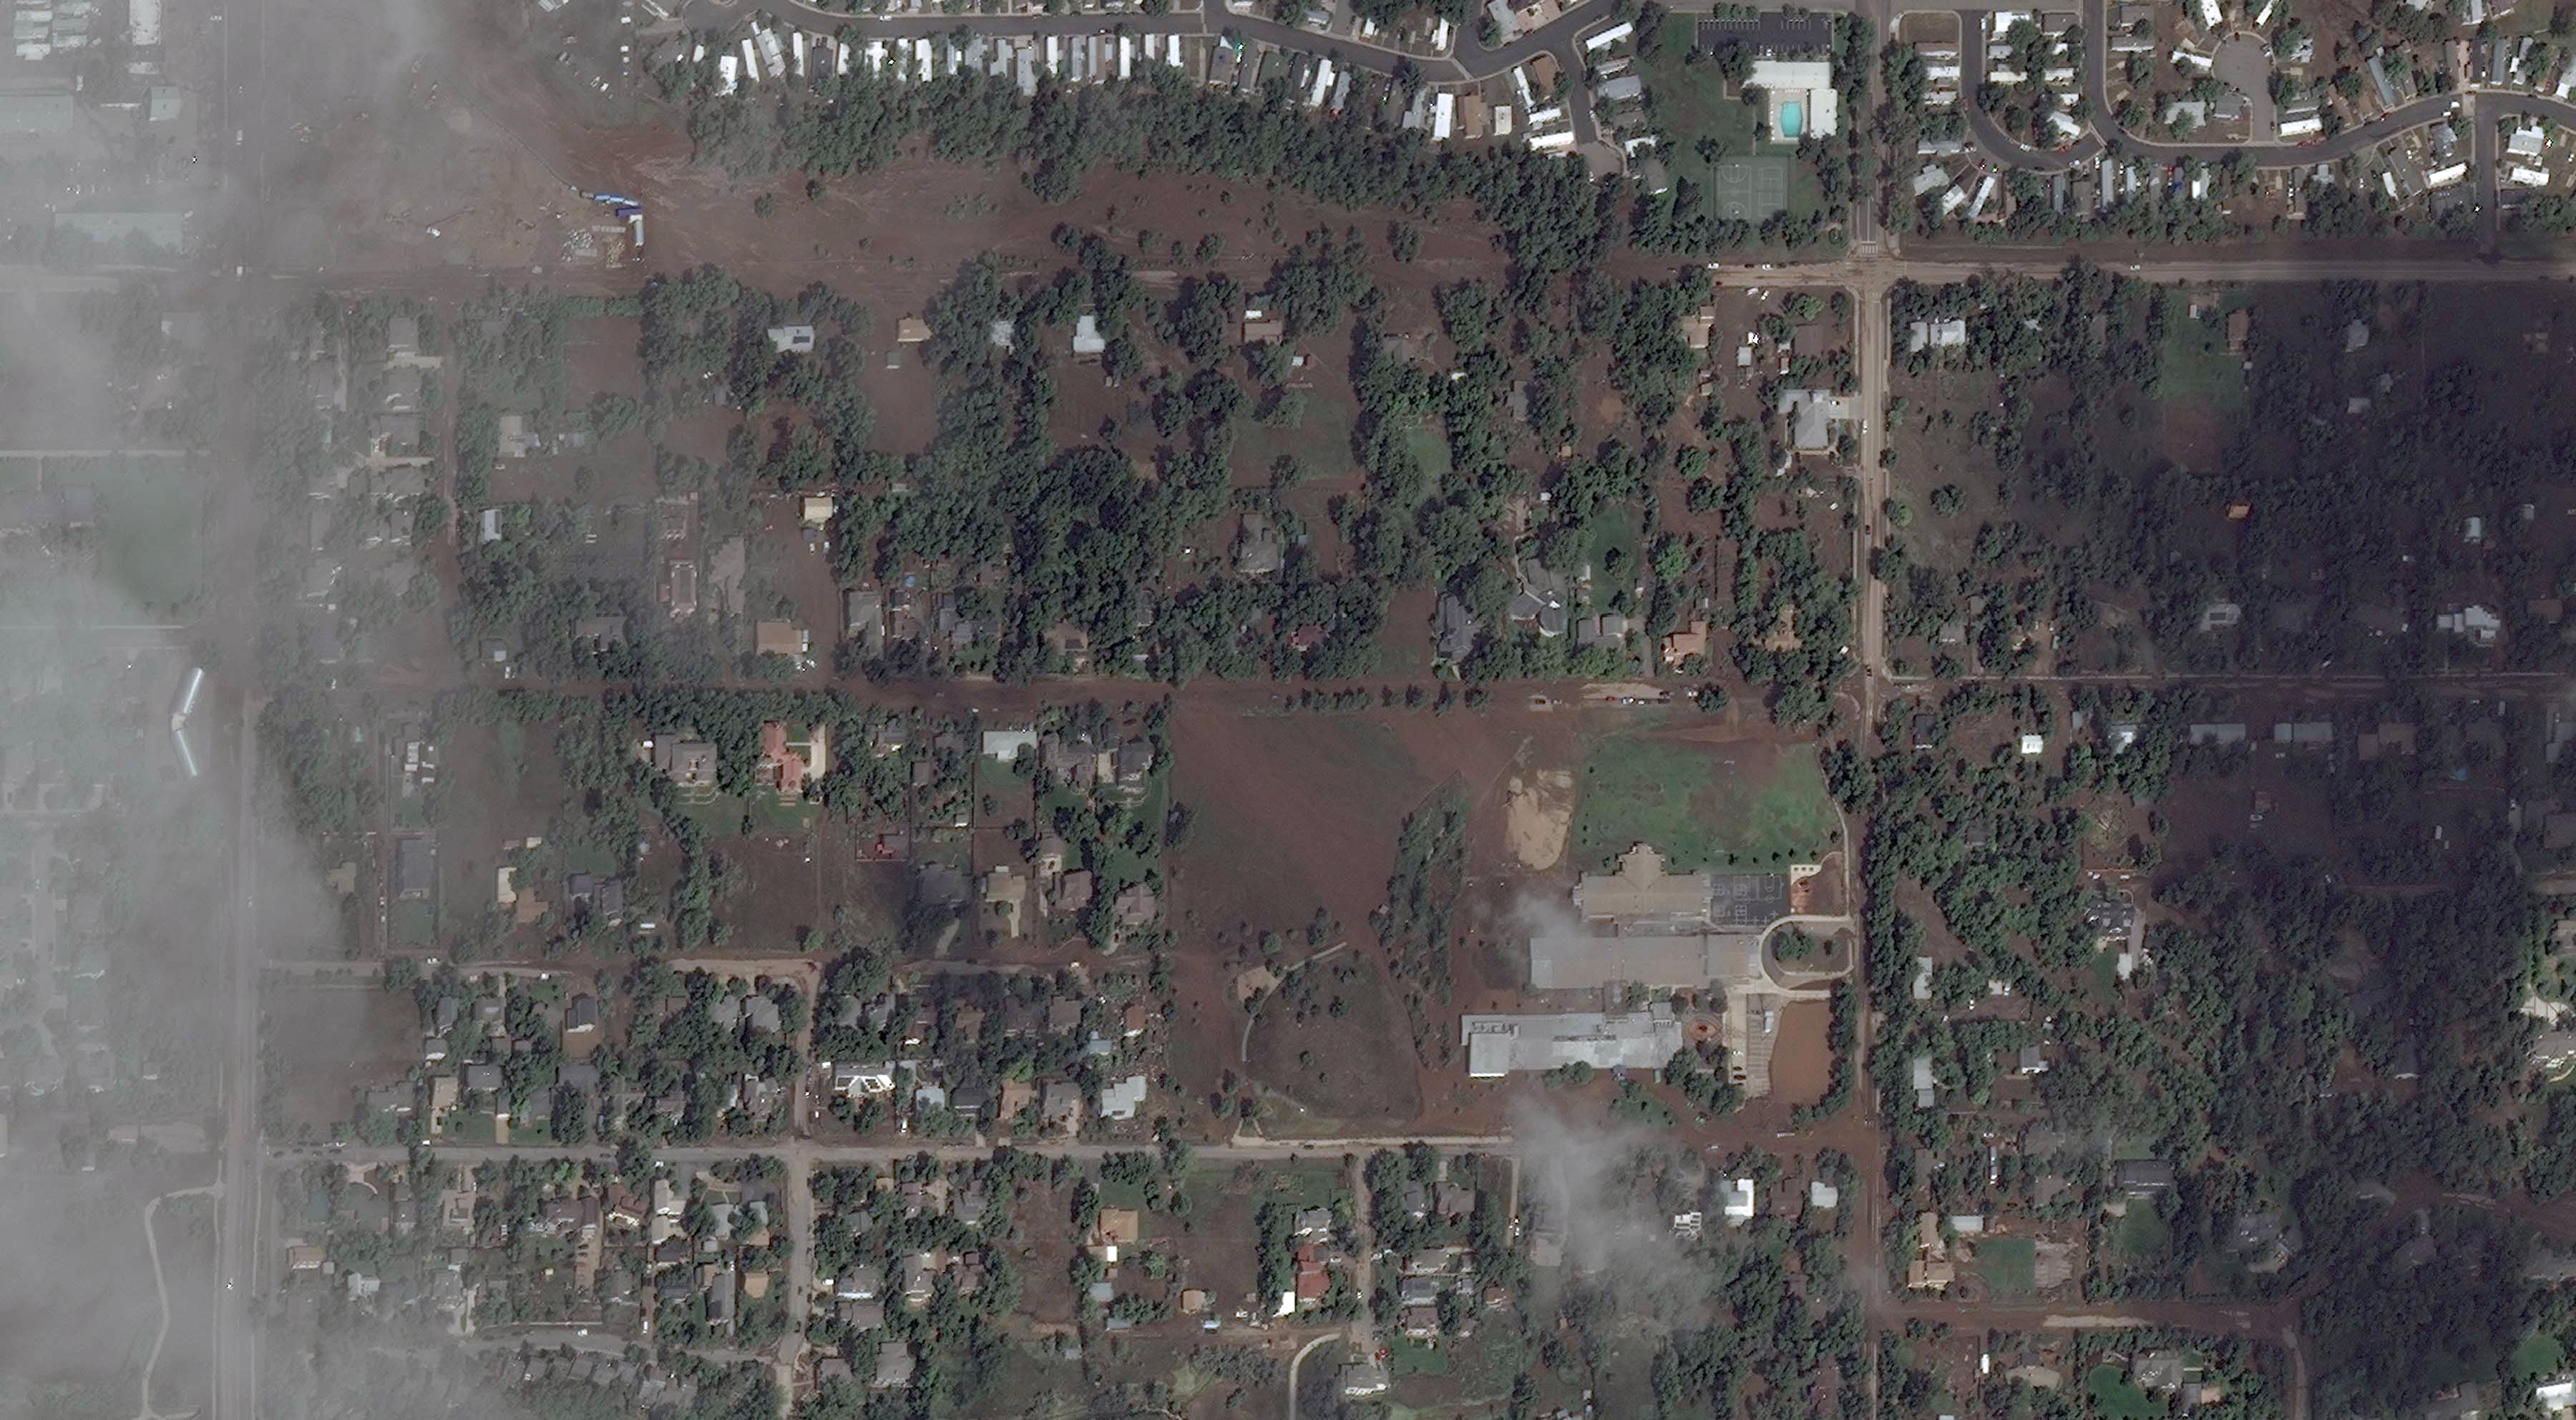 Aerial image of Boulder after the 2013 flood.  Notice that the floodwaters carried so much sediment that they appear brown in color